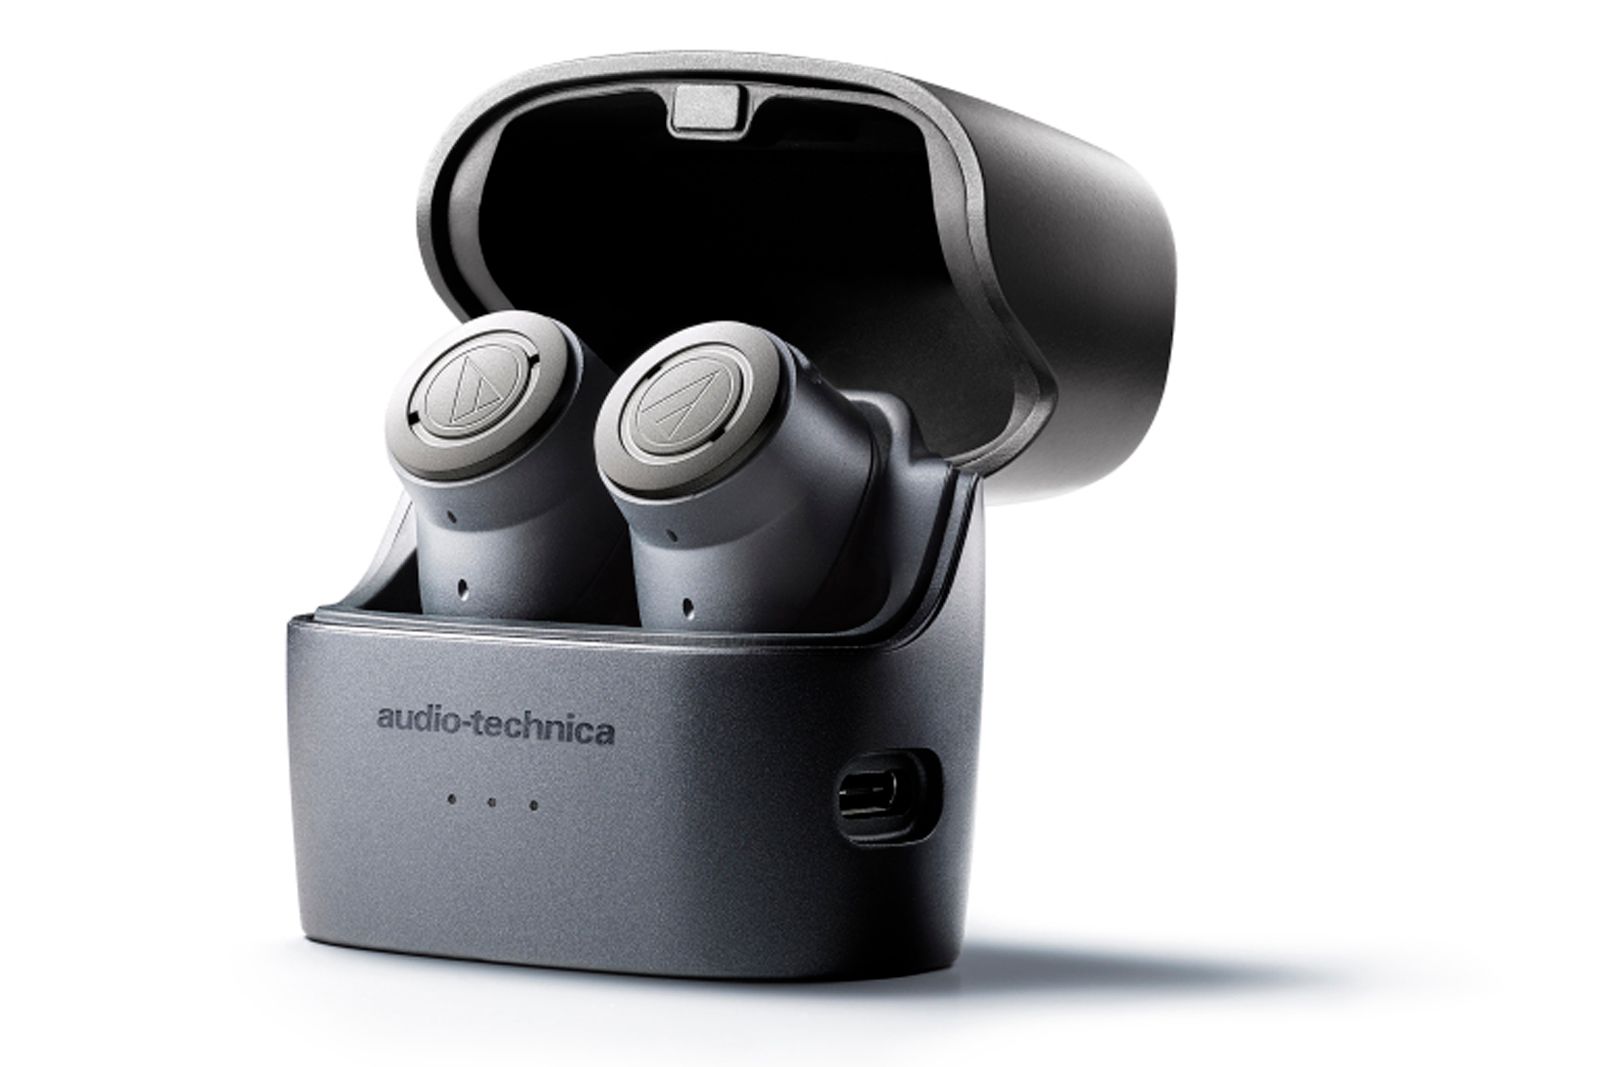 Audio-Technica intros ATH-ANC300TW noise-cancelling wireless earbuds image 1